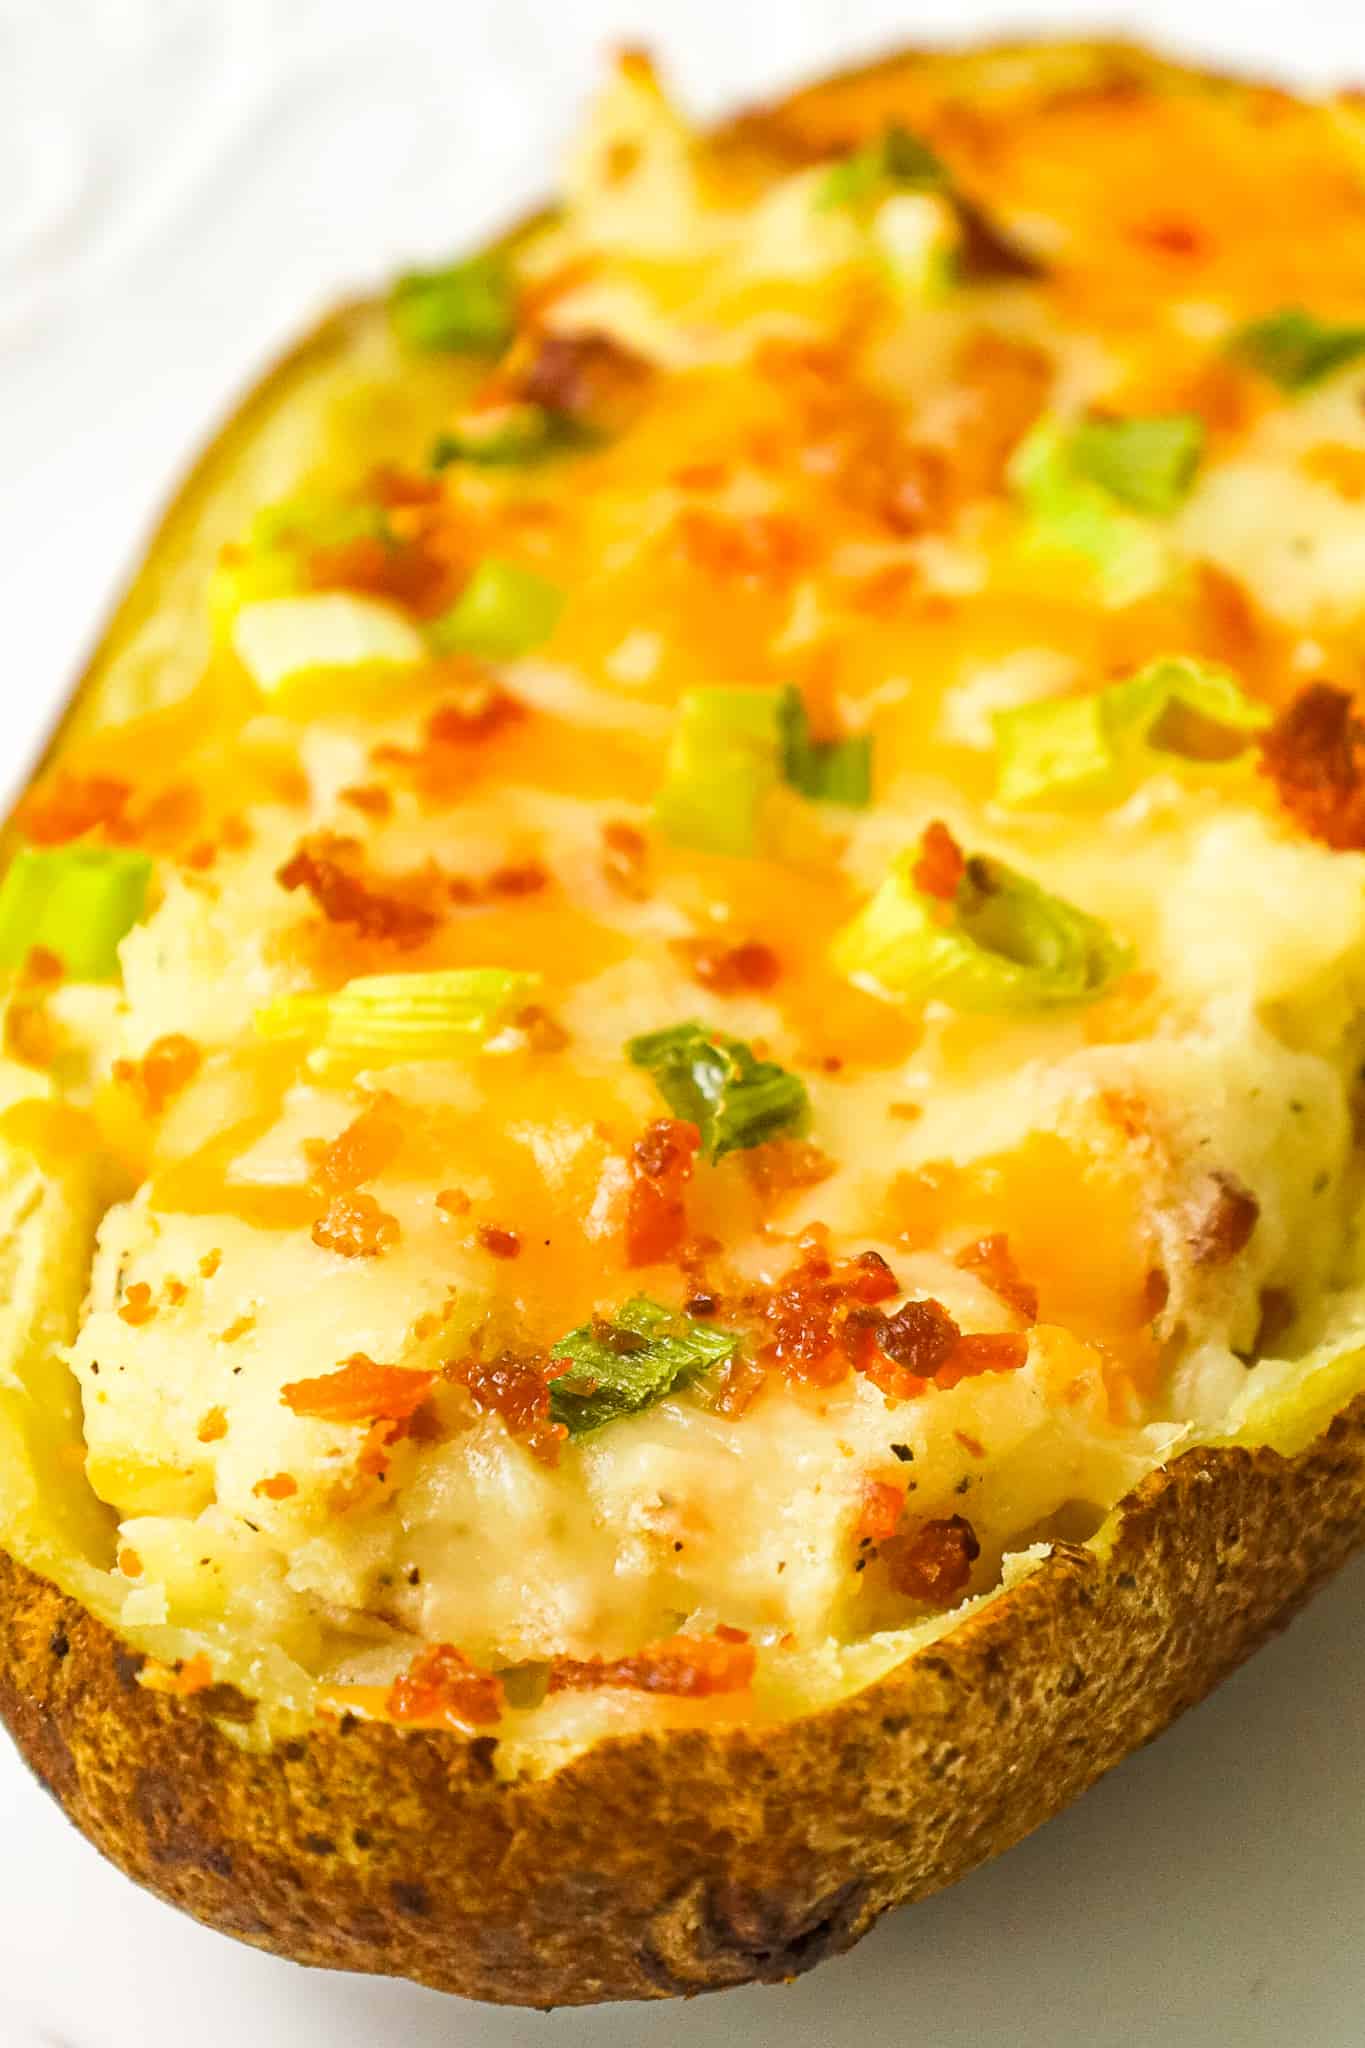 Twice Baked Potatoes are a delicious side dish recipe of potato skins filled with mashed potatoes loaded with cheese, crumbled bacon, sour cream and green onions.